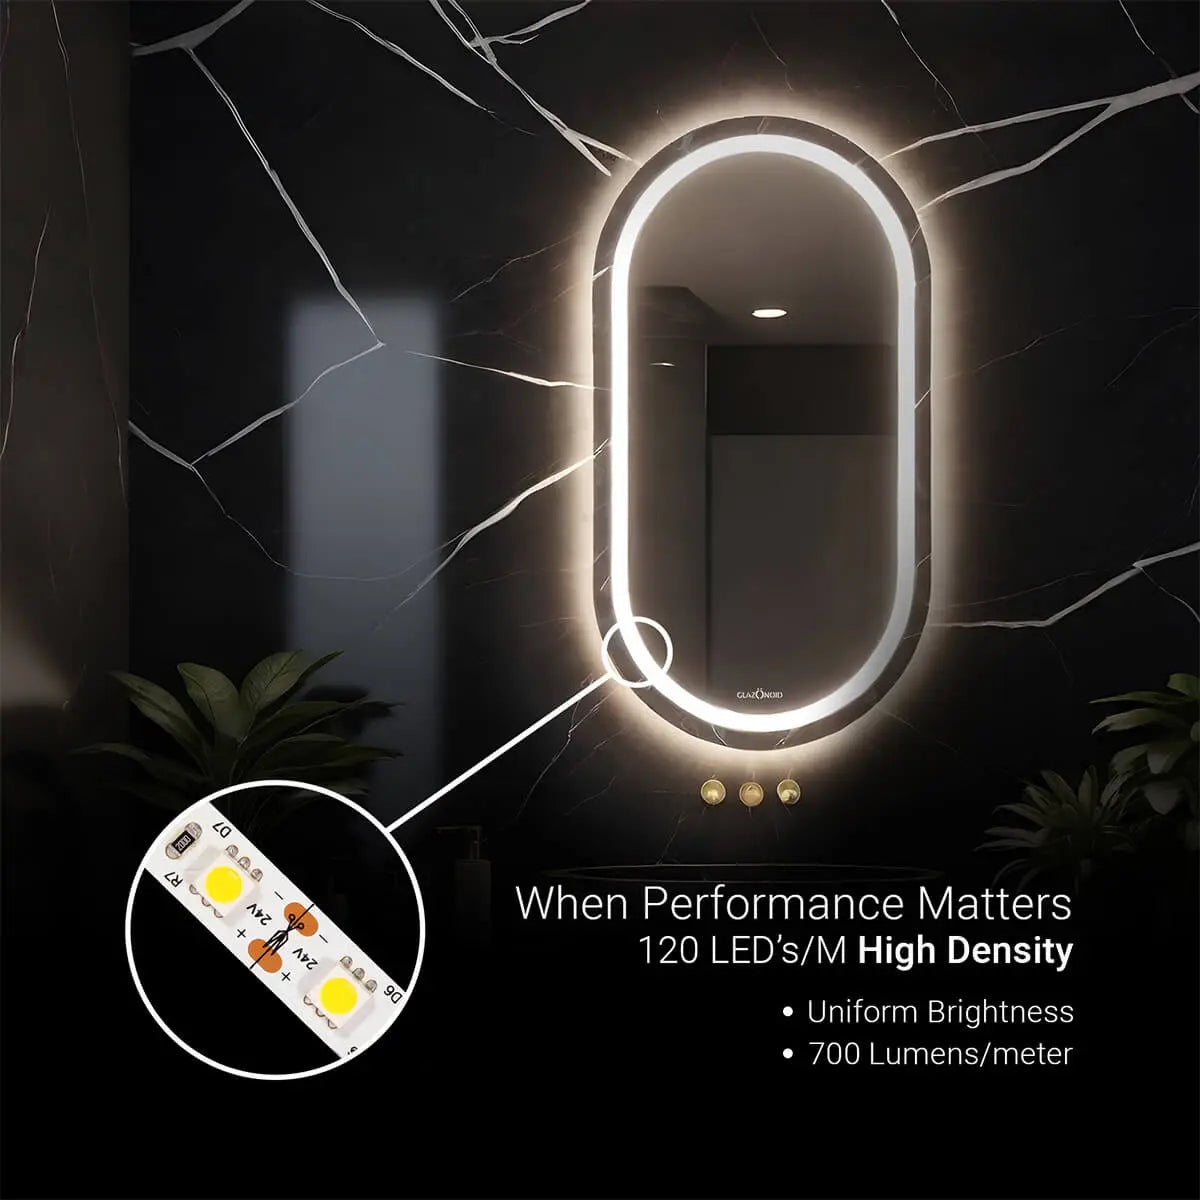 A wall-mounted, oval-shaped bathroom mirror with a LED border. The mirror has an LED light strip with adjustable color temperature behind it. The text "When Performance Matters" written below the mirror. Below that are specifications about the LED lights, including "120 LEDs/M High Density" and "700 Lumens/meter.